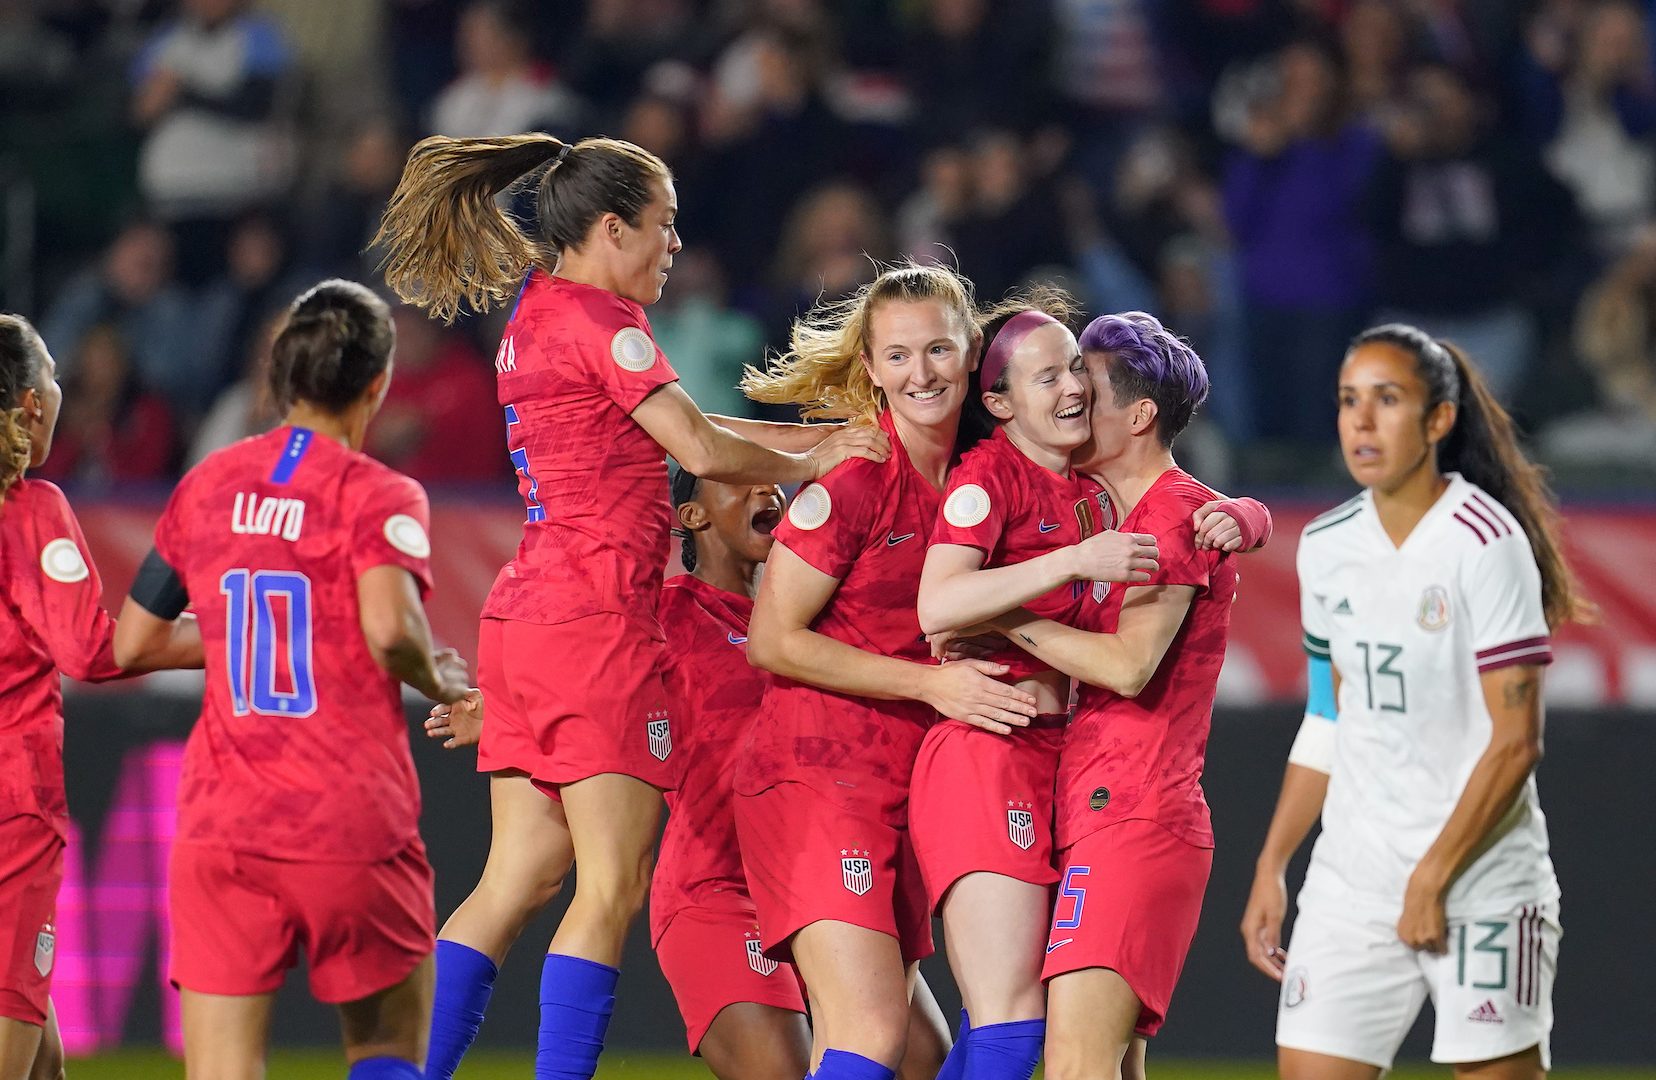 Lavelle scores as USWNT advance to final, qualify for 2020 Tokyo Olympics  Featured Image